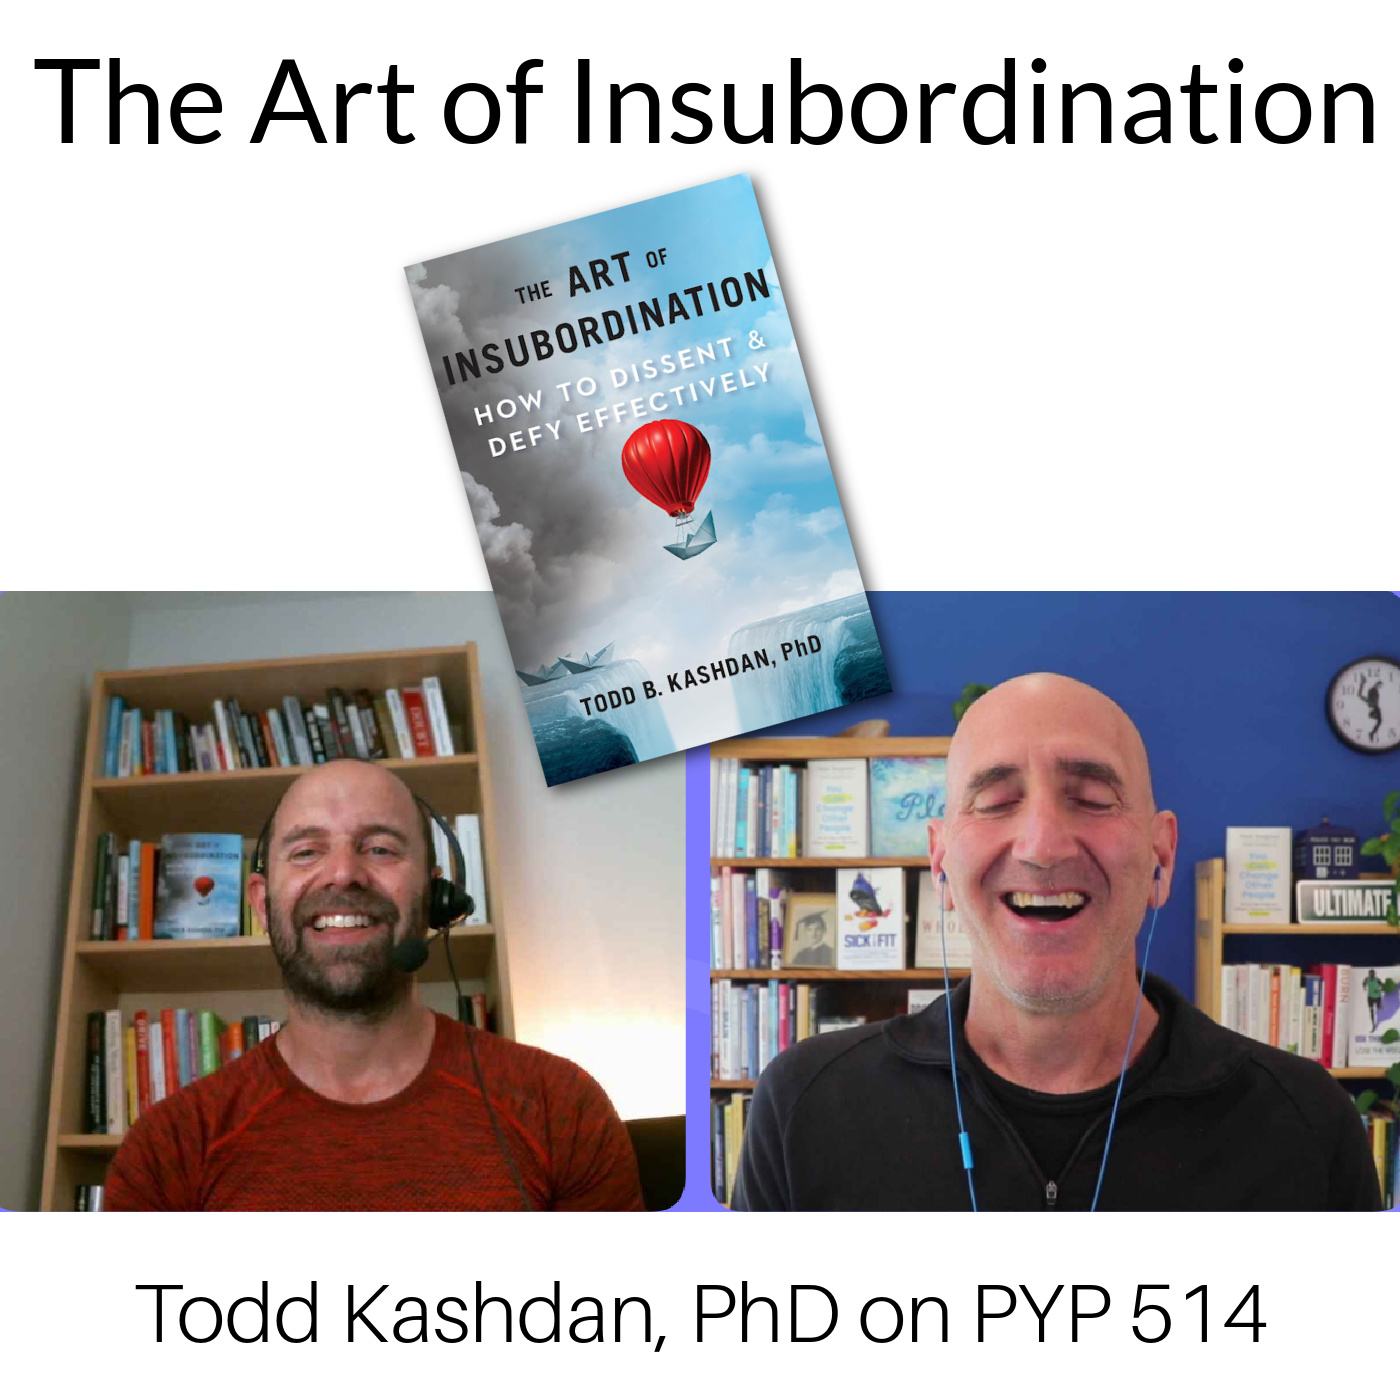 The Art of Insubordination: How to Dissent and Defy Effectively with Todd Kashdan on PYP 514